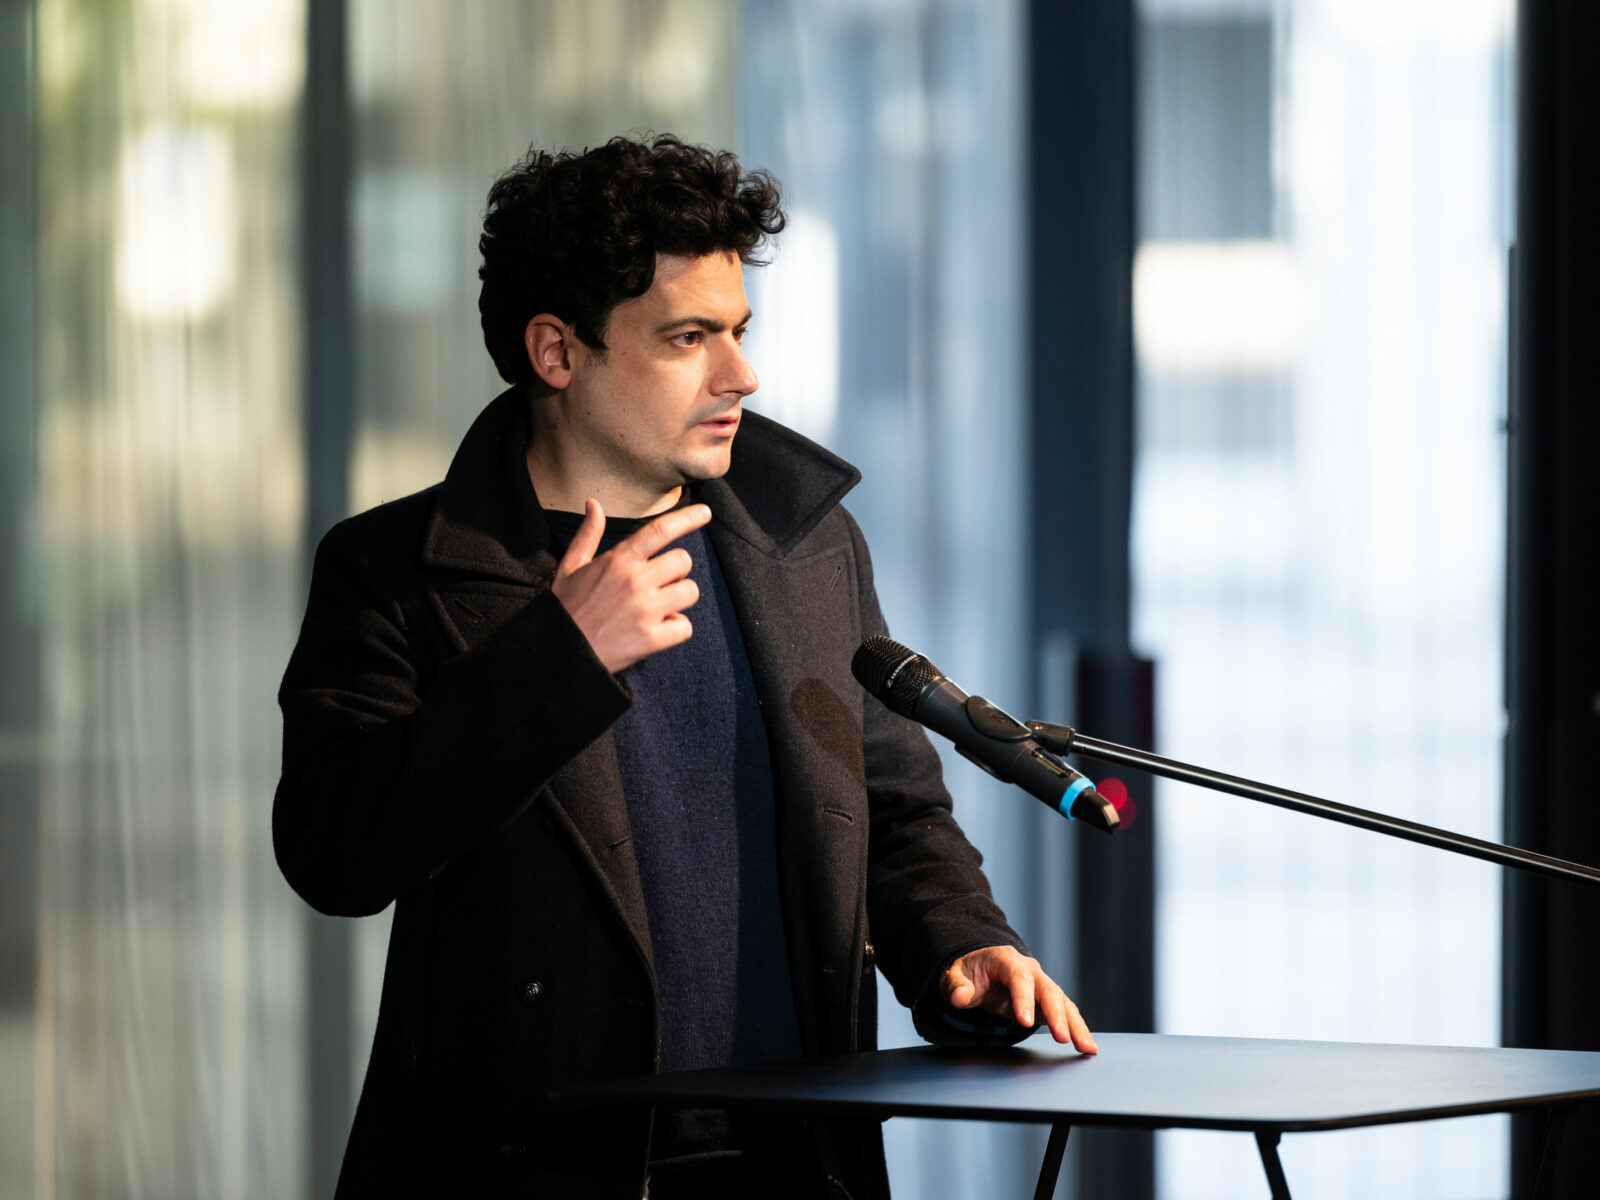 Clément Cogitore stands at a lectern and speaks with a sweeping gesture.